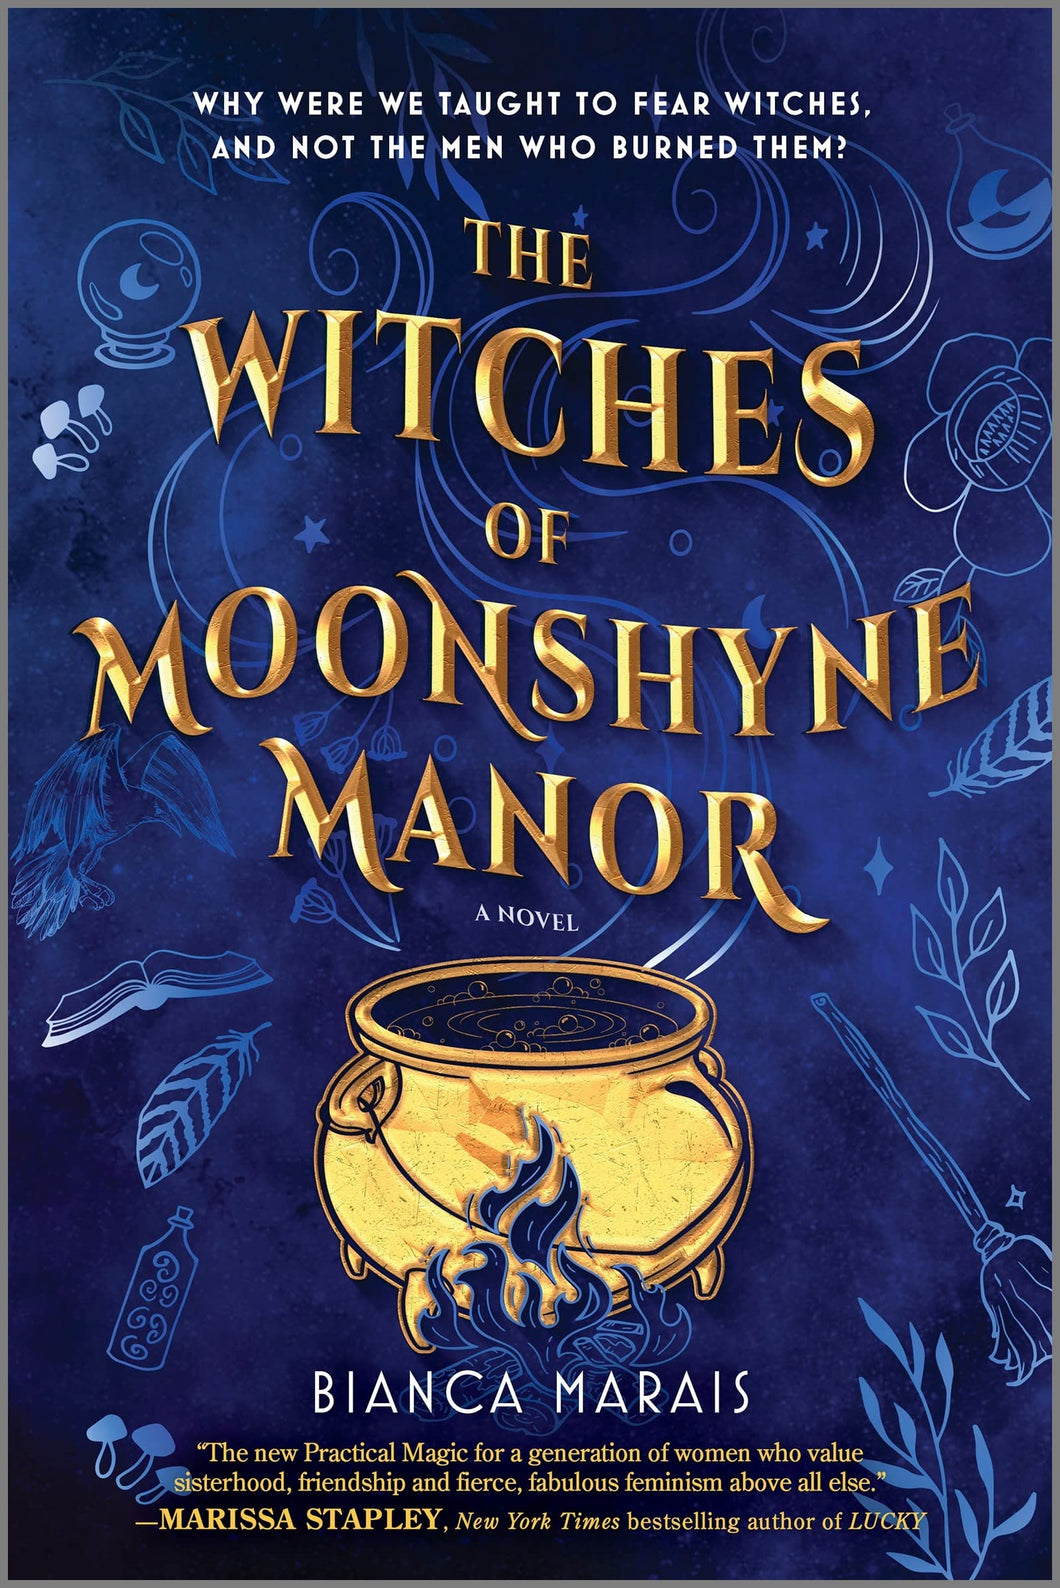 The Witches of Moonshyne Manor [Bianca Marais]